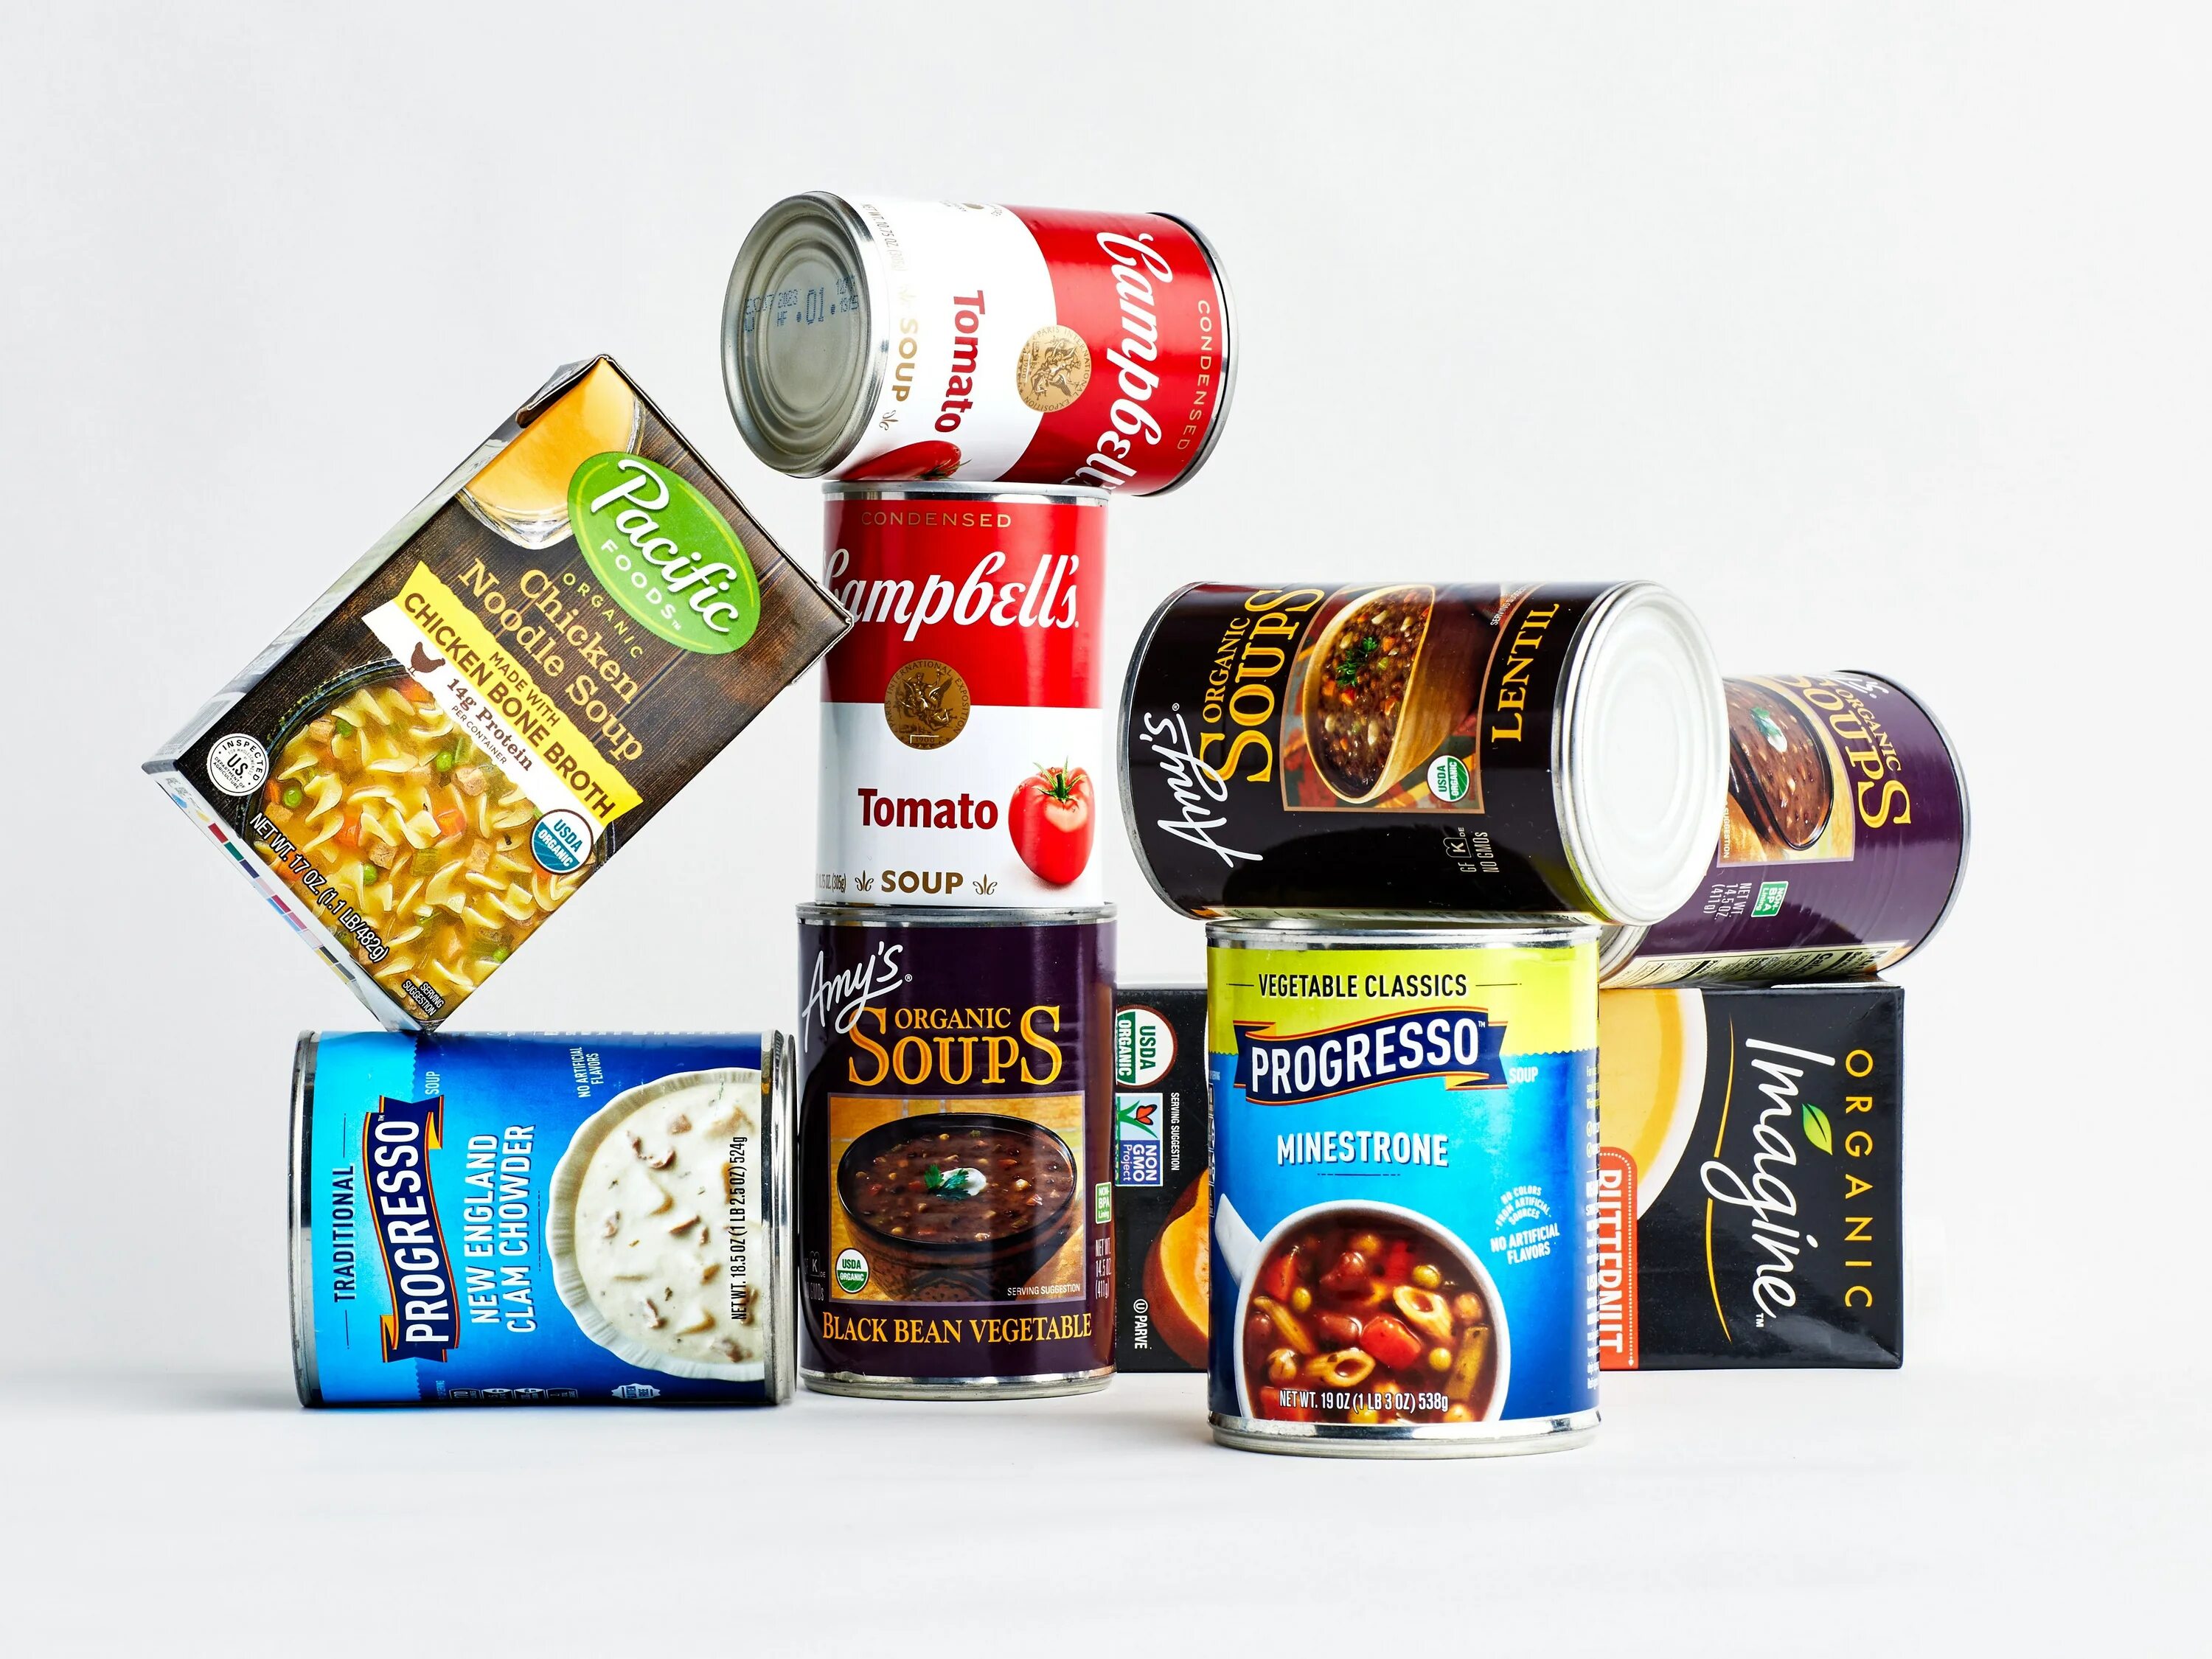 Soup cans. Canned. Canned Soup. Can of Soup.